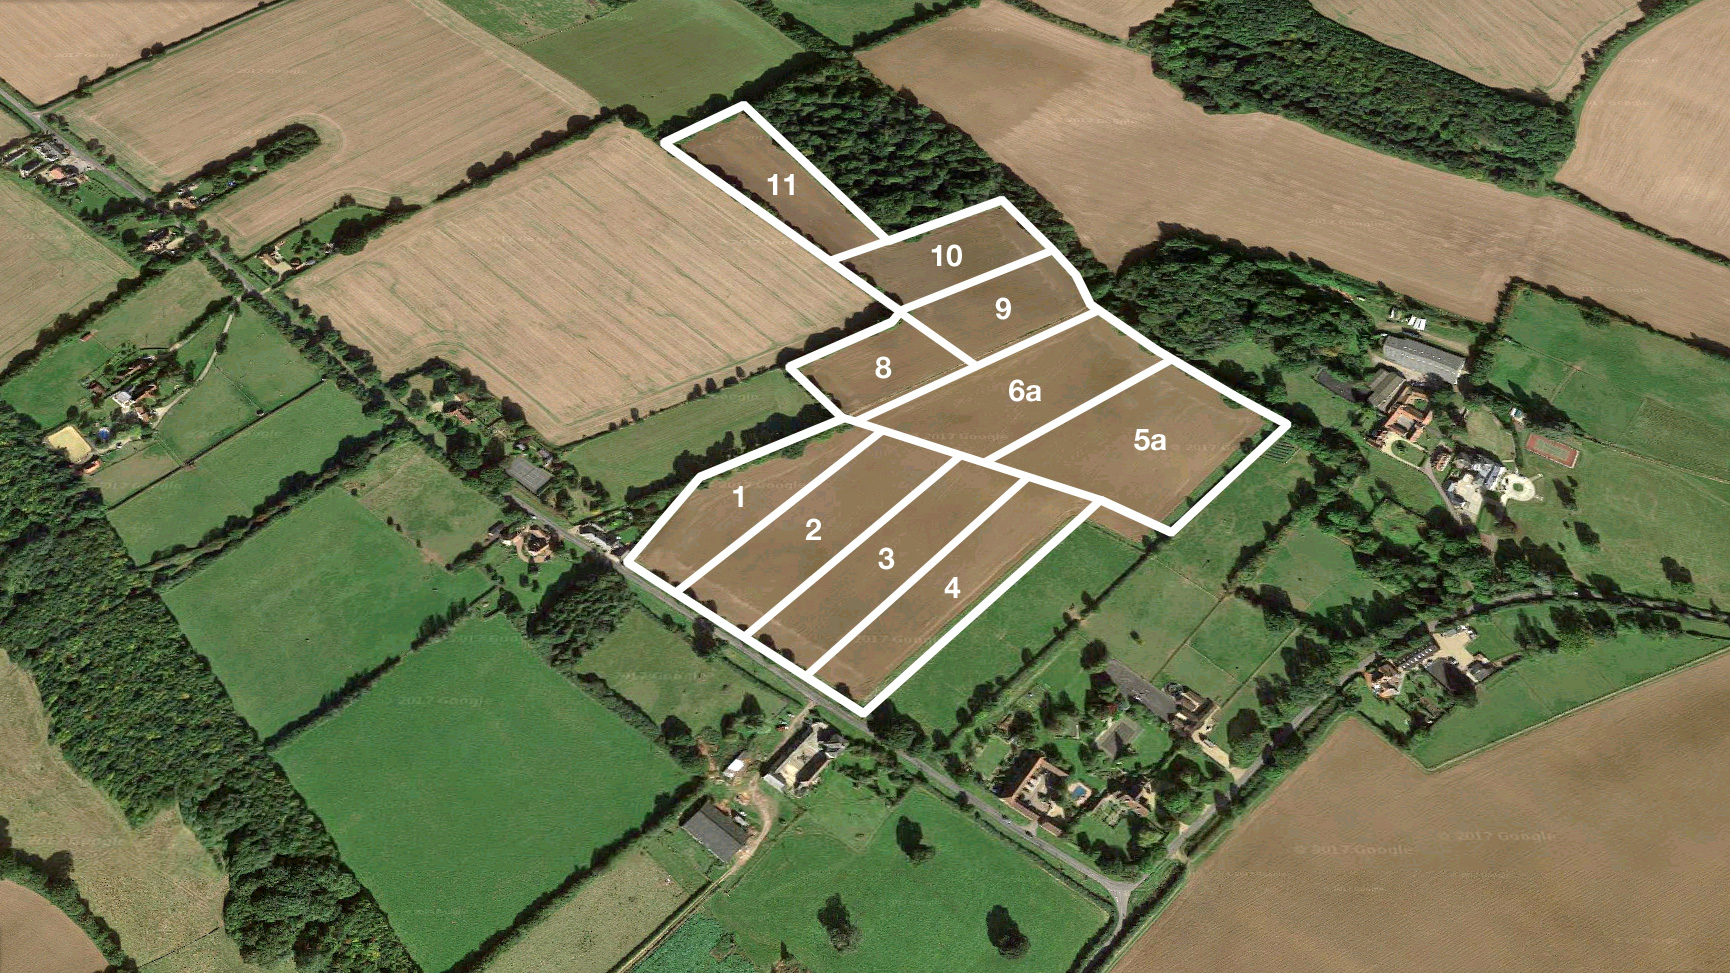 Land for sale in Gaddesden Row aerial view